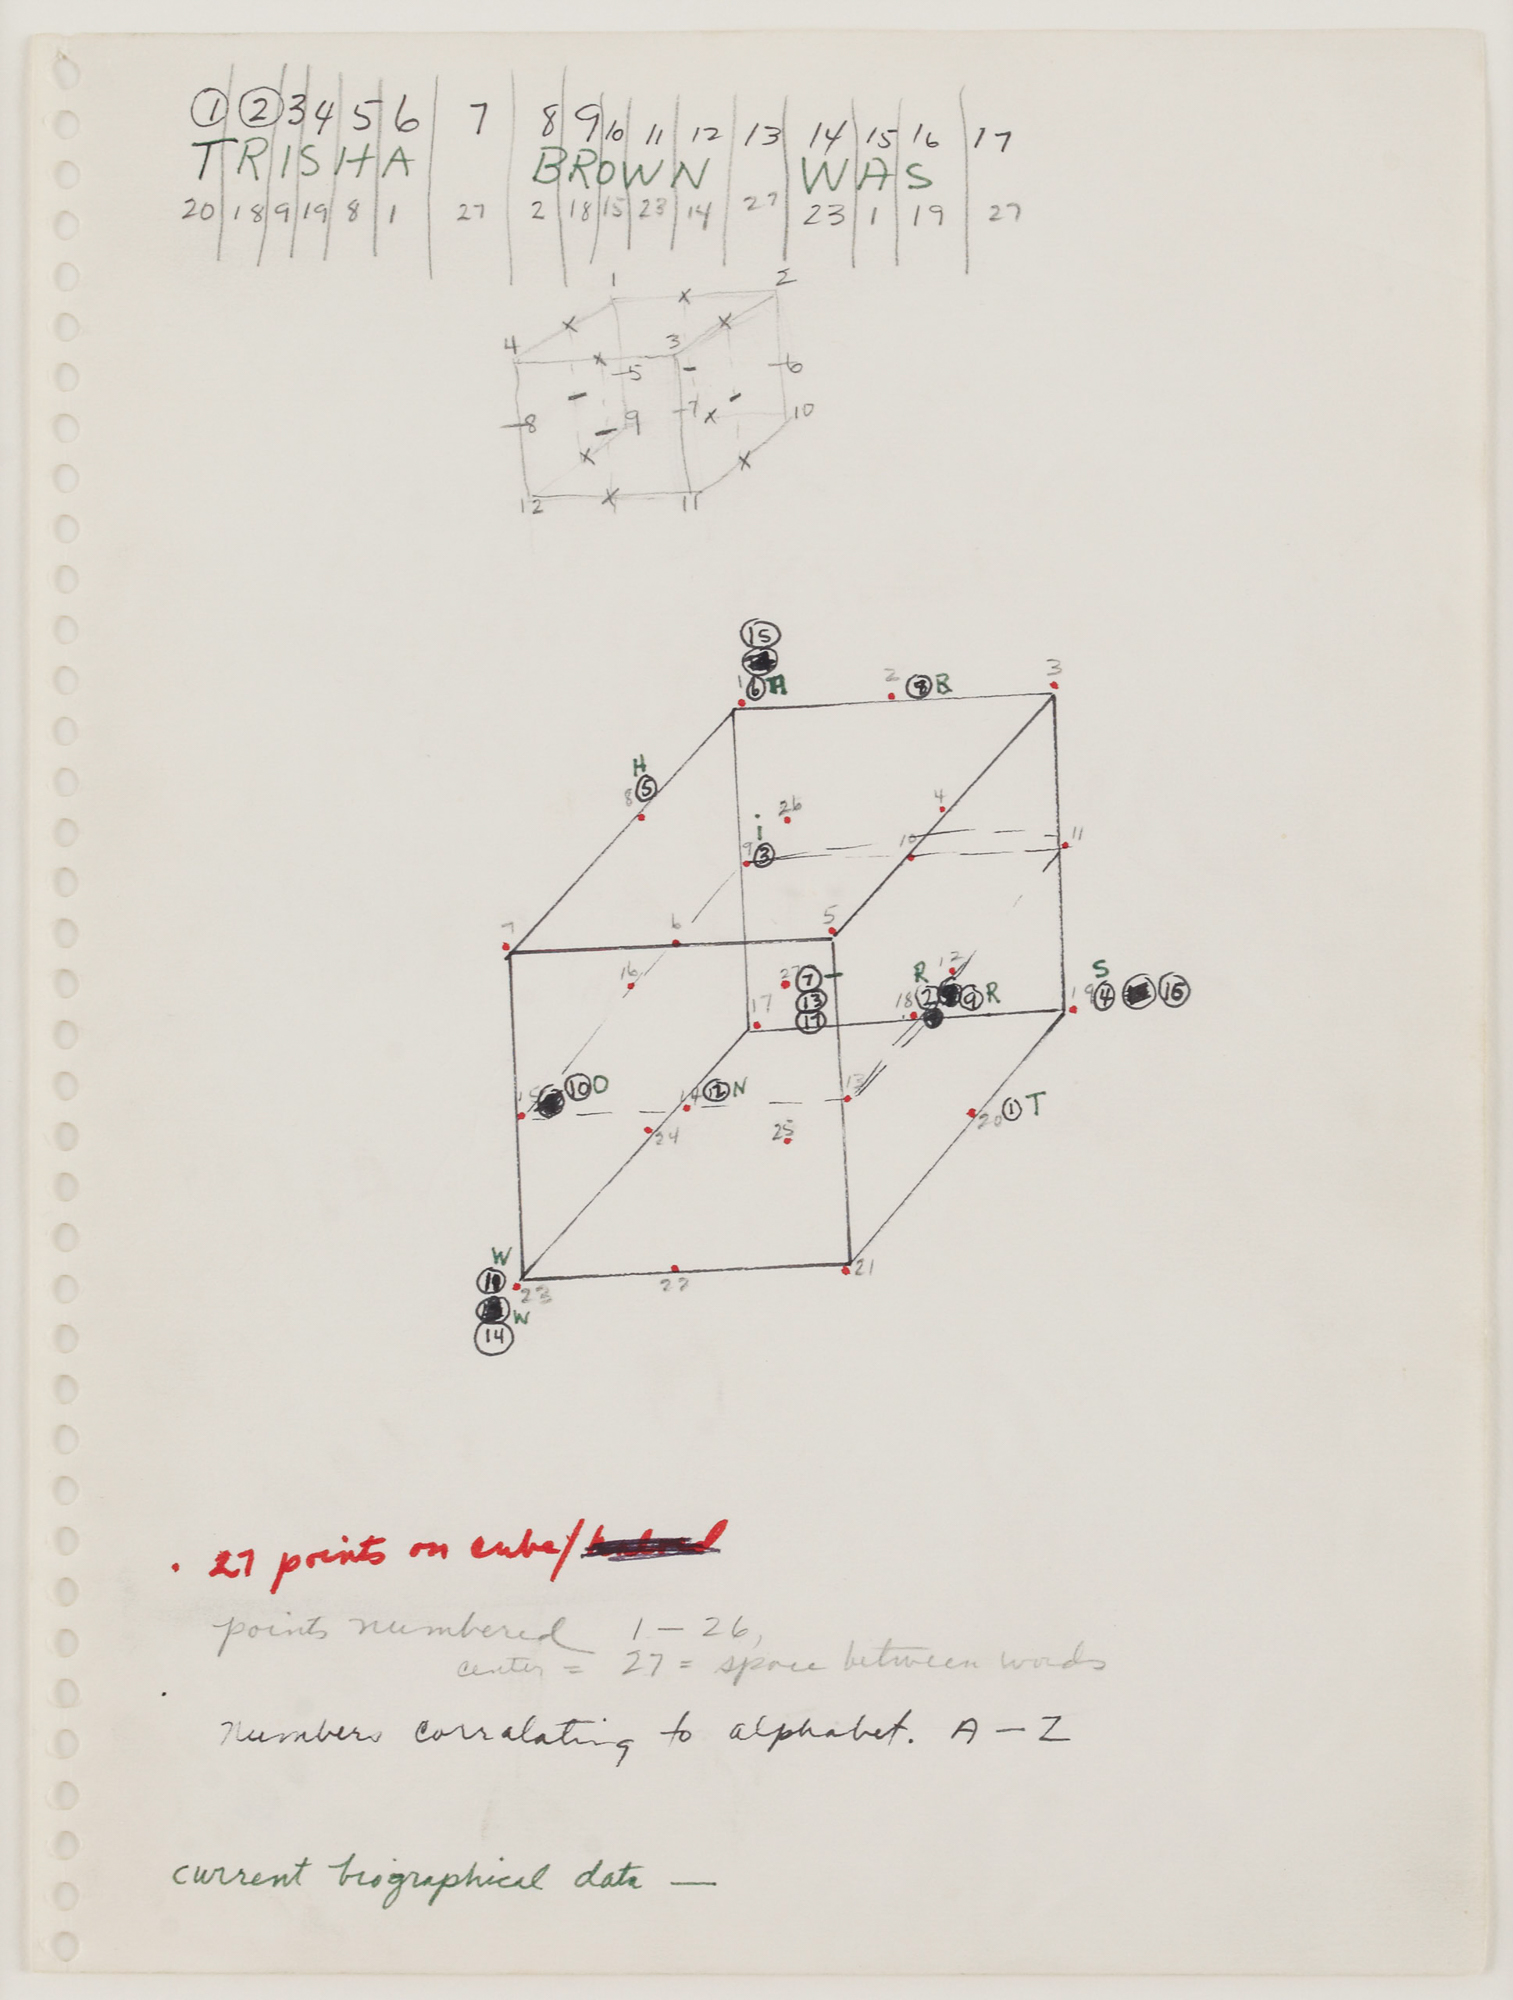 Trisha Brown Detail from Untitled (Locus), 1975 Ink and graphite on paper Set of 8 drawings: 12.0625 x 9 inches (30.6 x 22.9 cm), this part